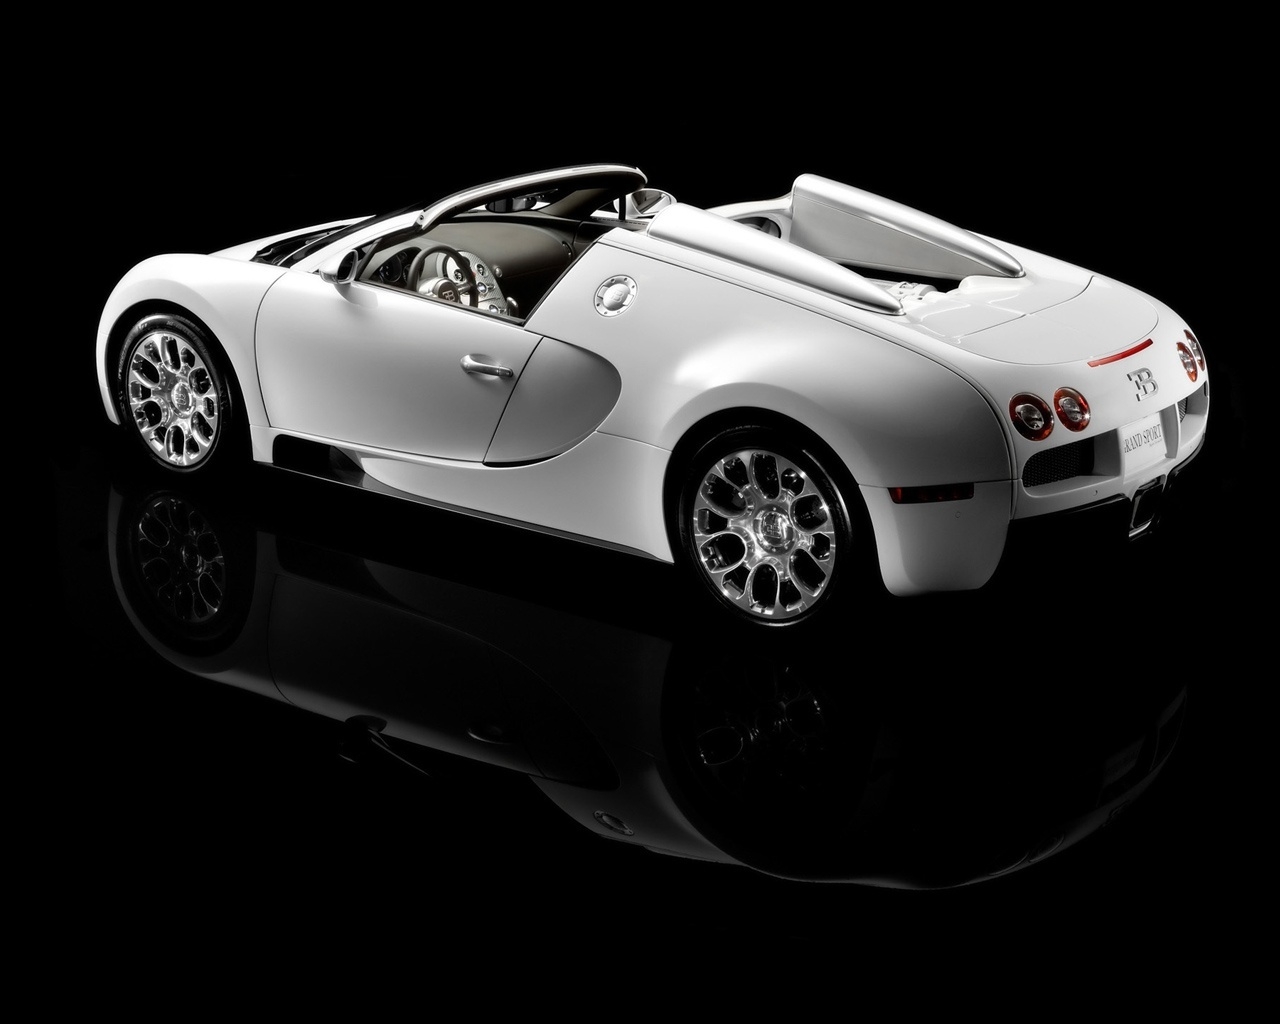 Bugatti Veyron 16.4 Grand Sport Production 2009 - Rear And Side Topless for 1280 x 1024 resolution